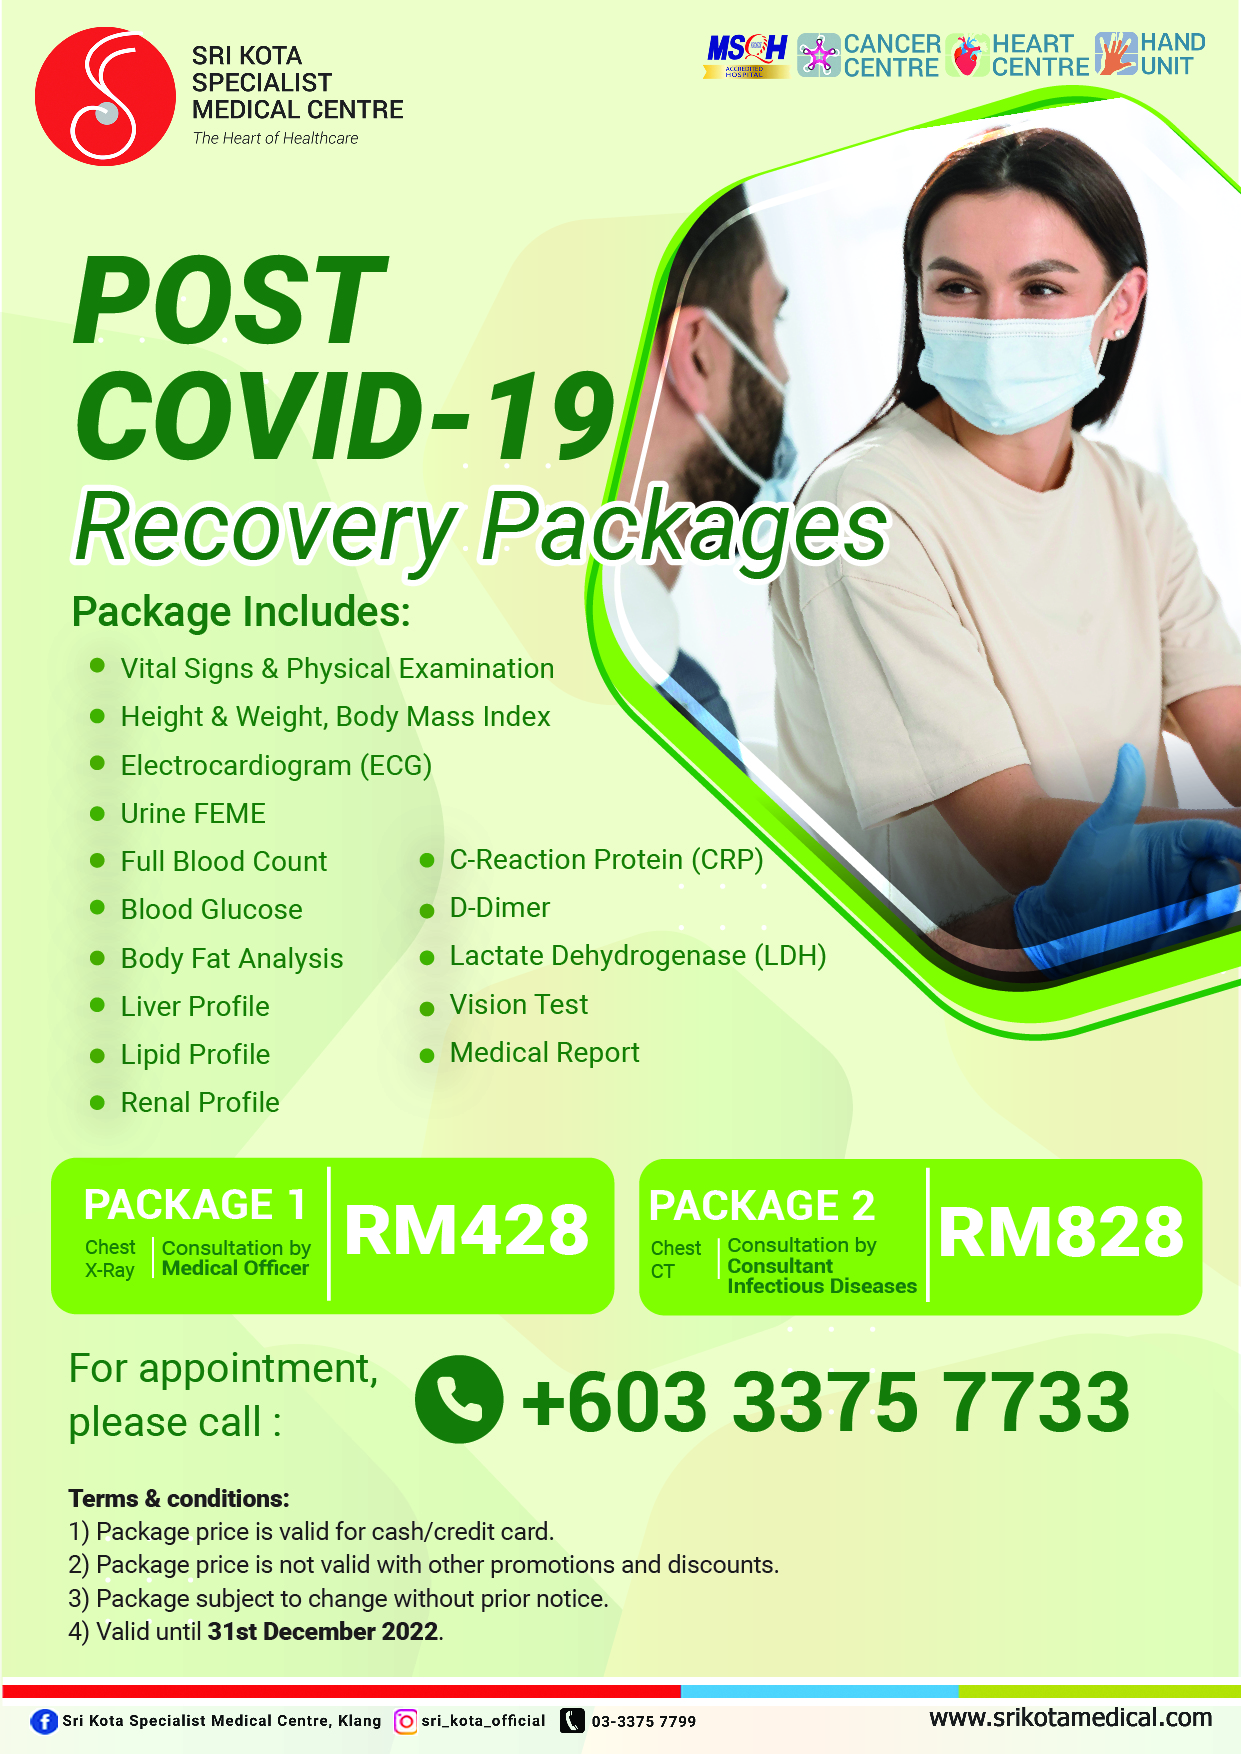 Post Covid-19 Recovery Packages